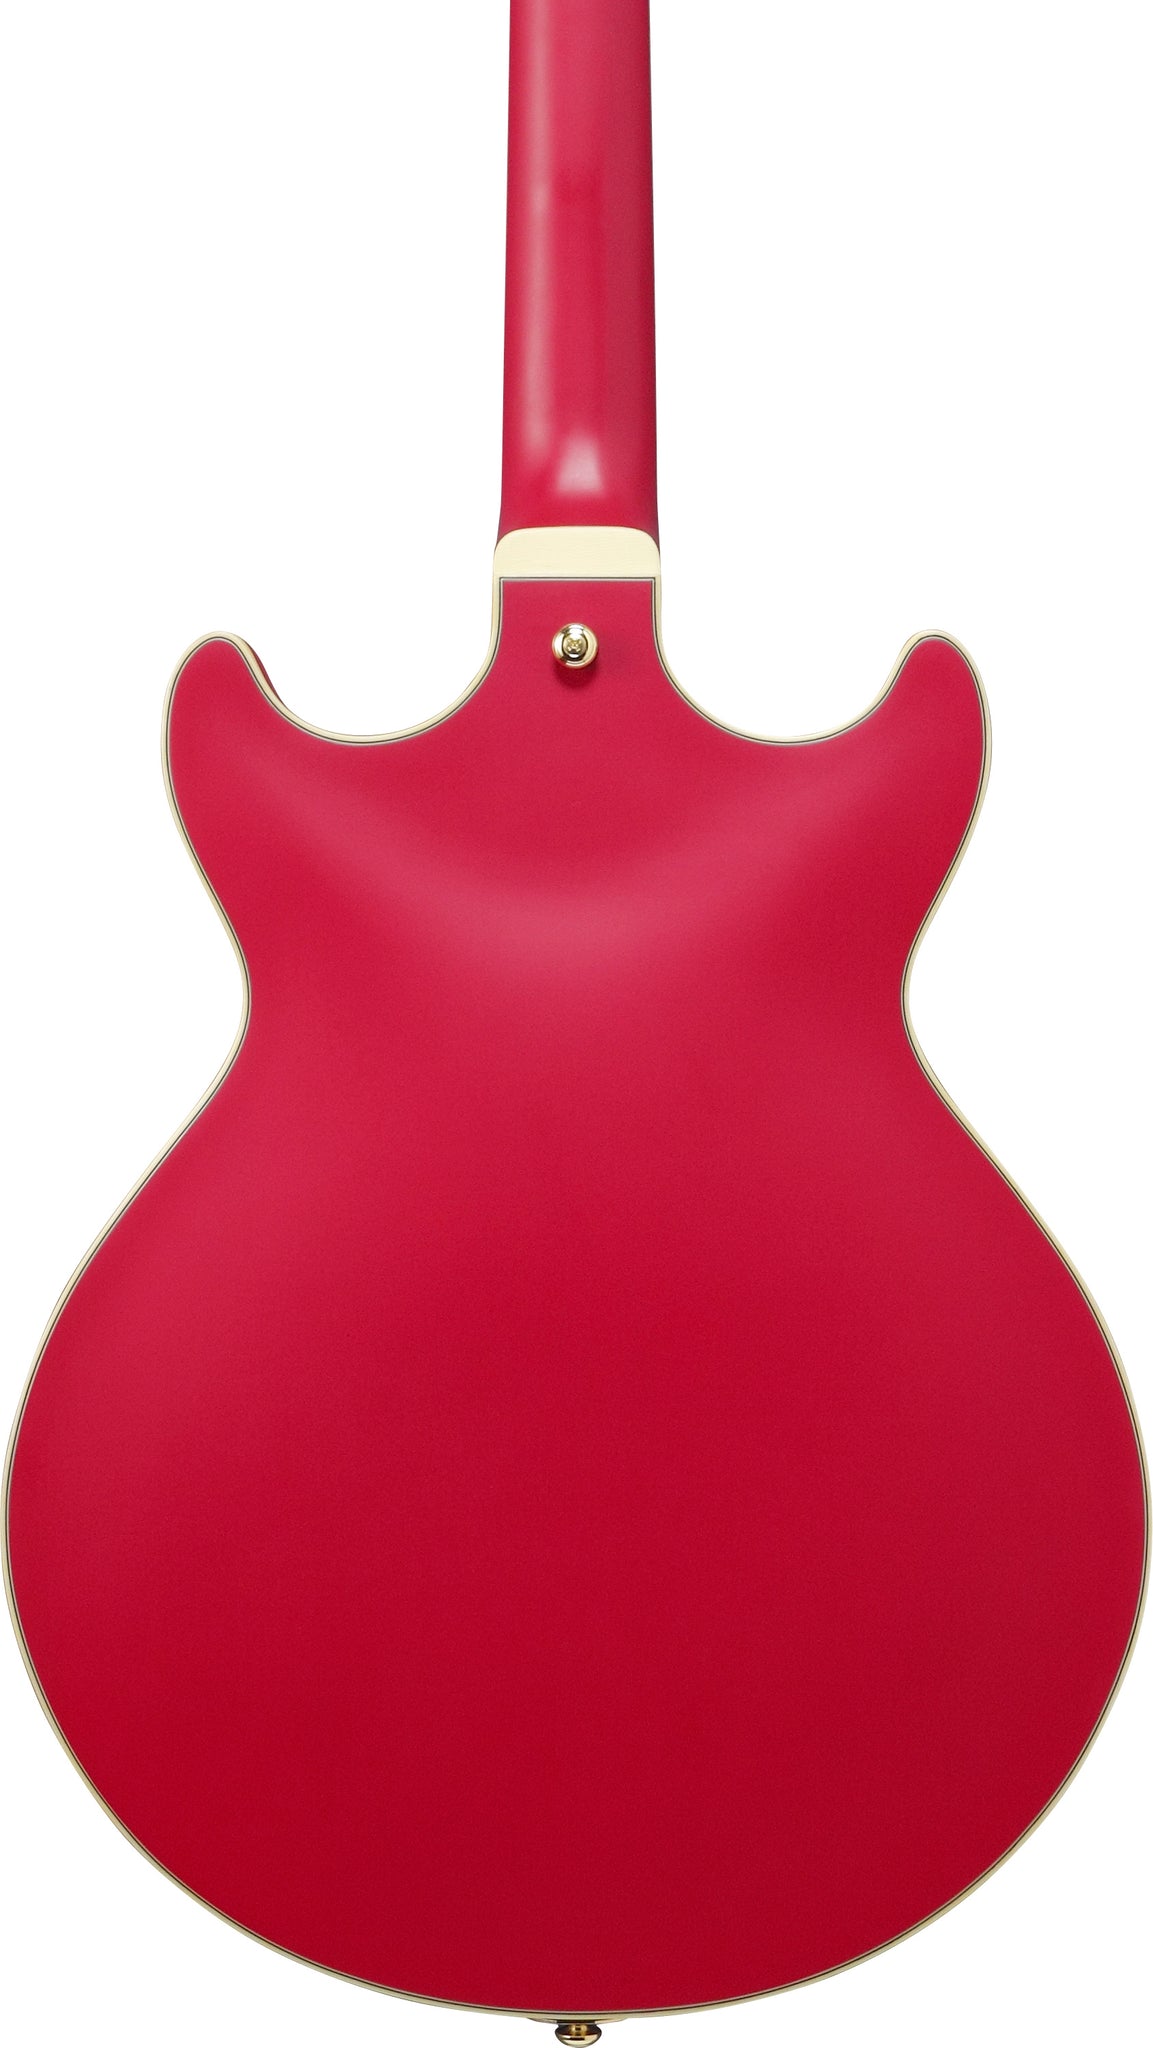 Ibanez AMH90CRF Artcore Expressionist Series Hollowbody Electric Guitar (Cherry Red Flat)